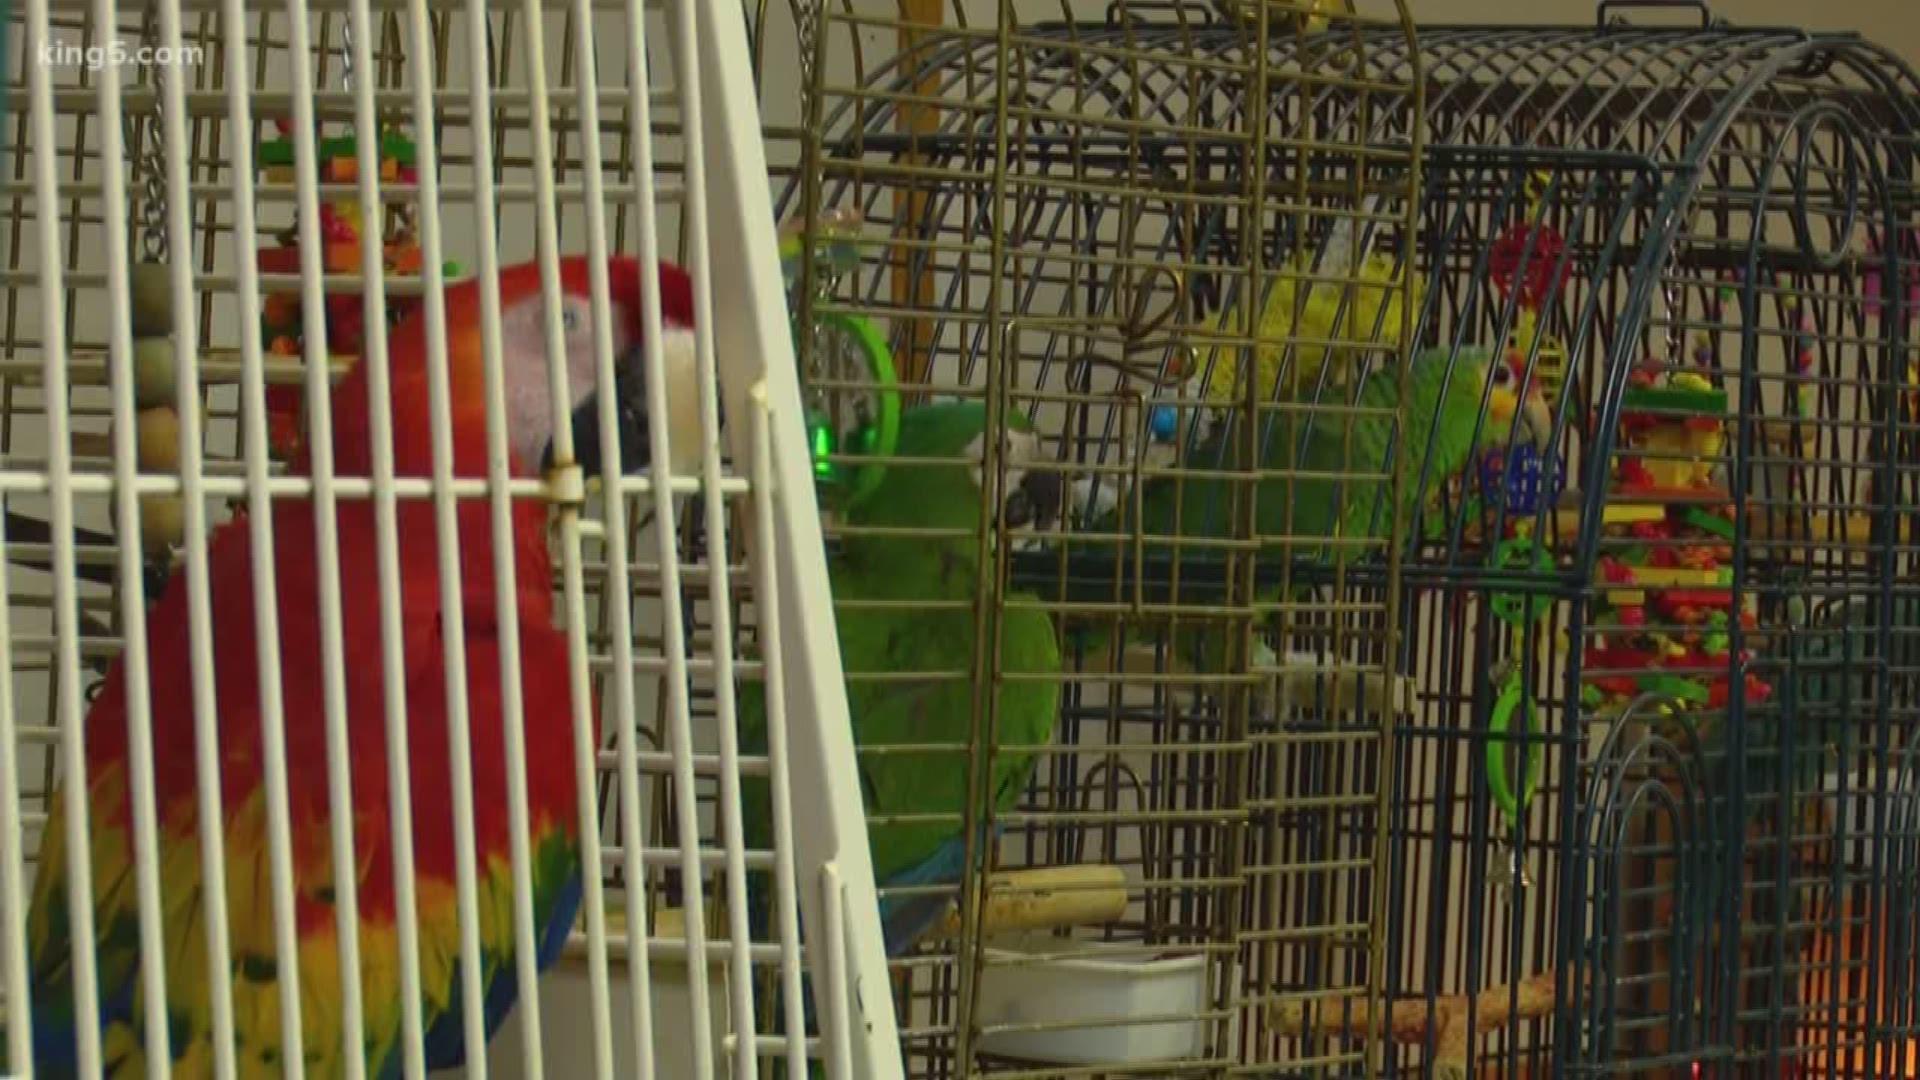 Two dozen exotic birds along with cats, dogs, horses, geese, and chickens were removed from a Thurston County home after concerns were raised about their wellbeing.